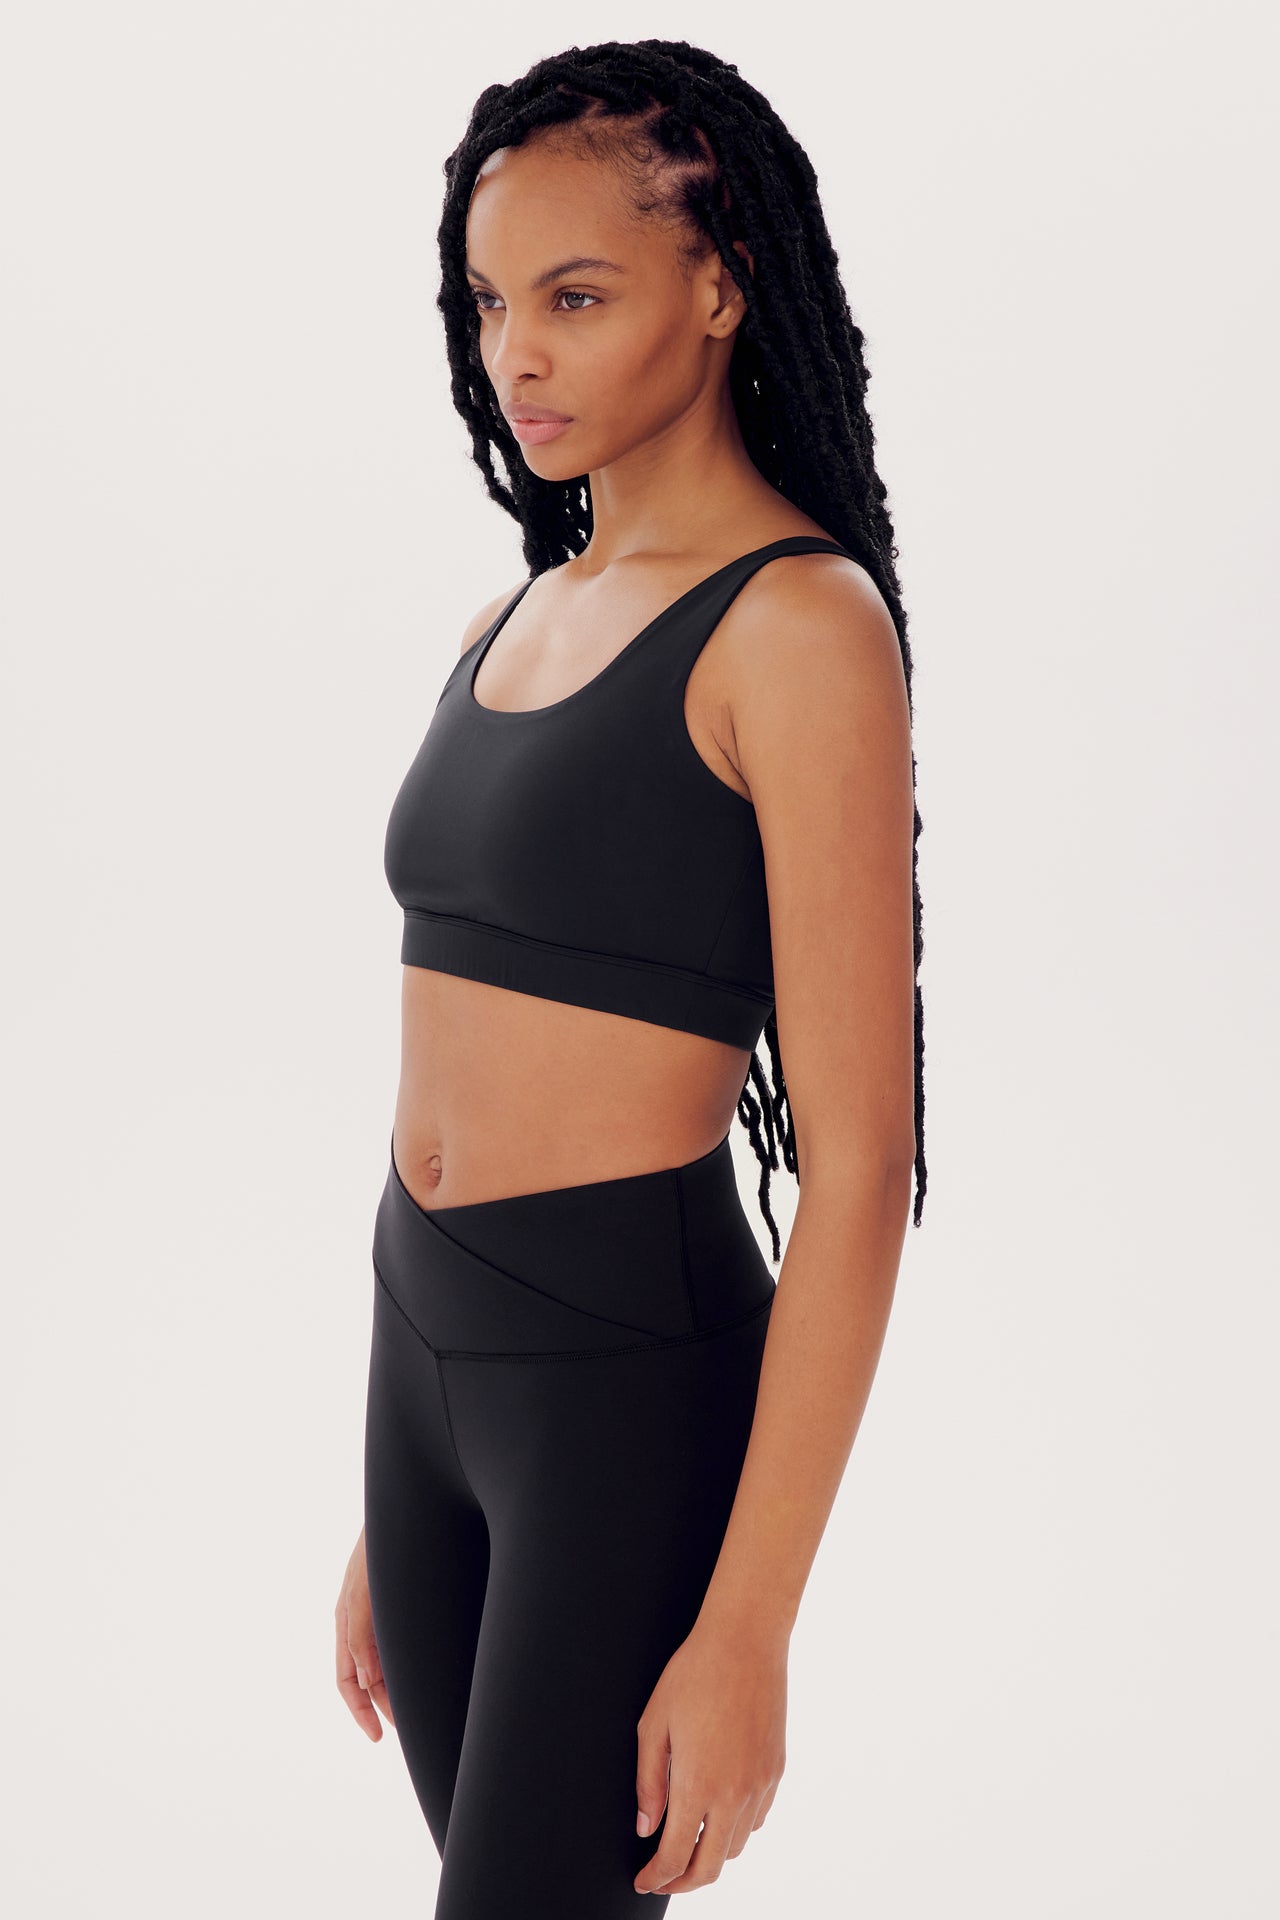 A young woman wearing a SPLITS59 Sprint Rigor Bra in Black and leggings, standing sideways for her gym workout, with long braided hair.